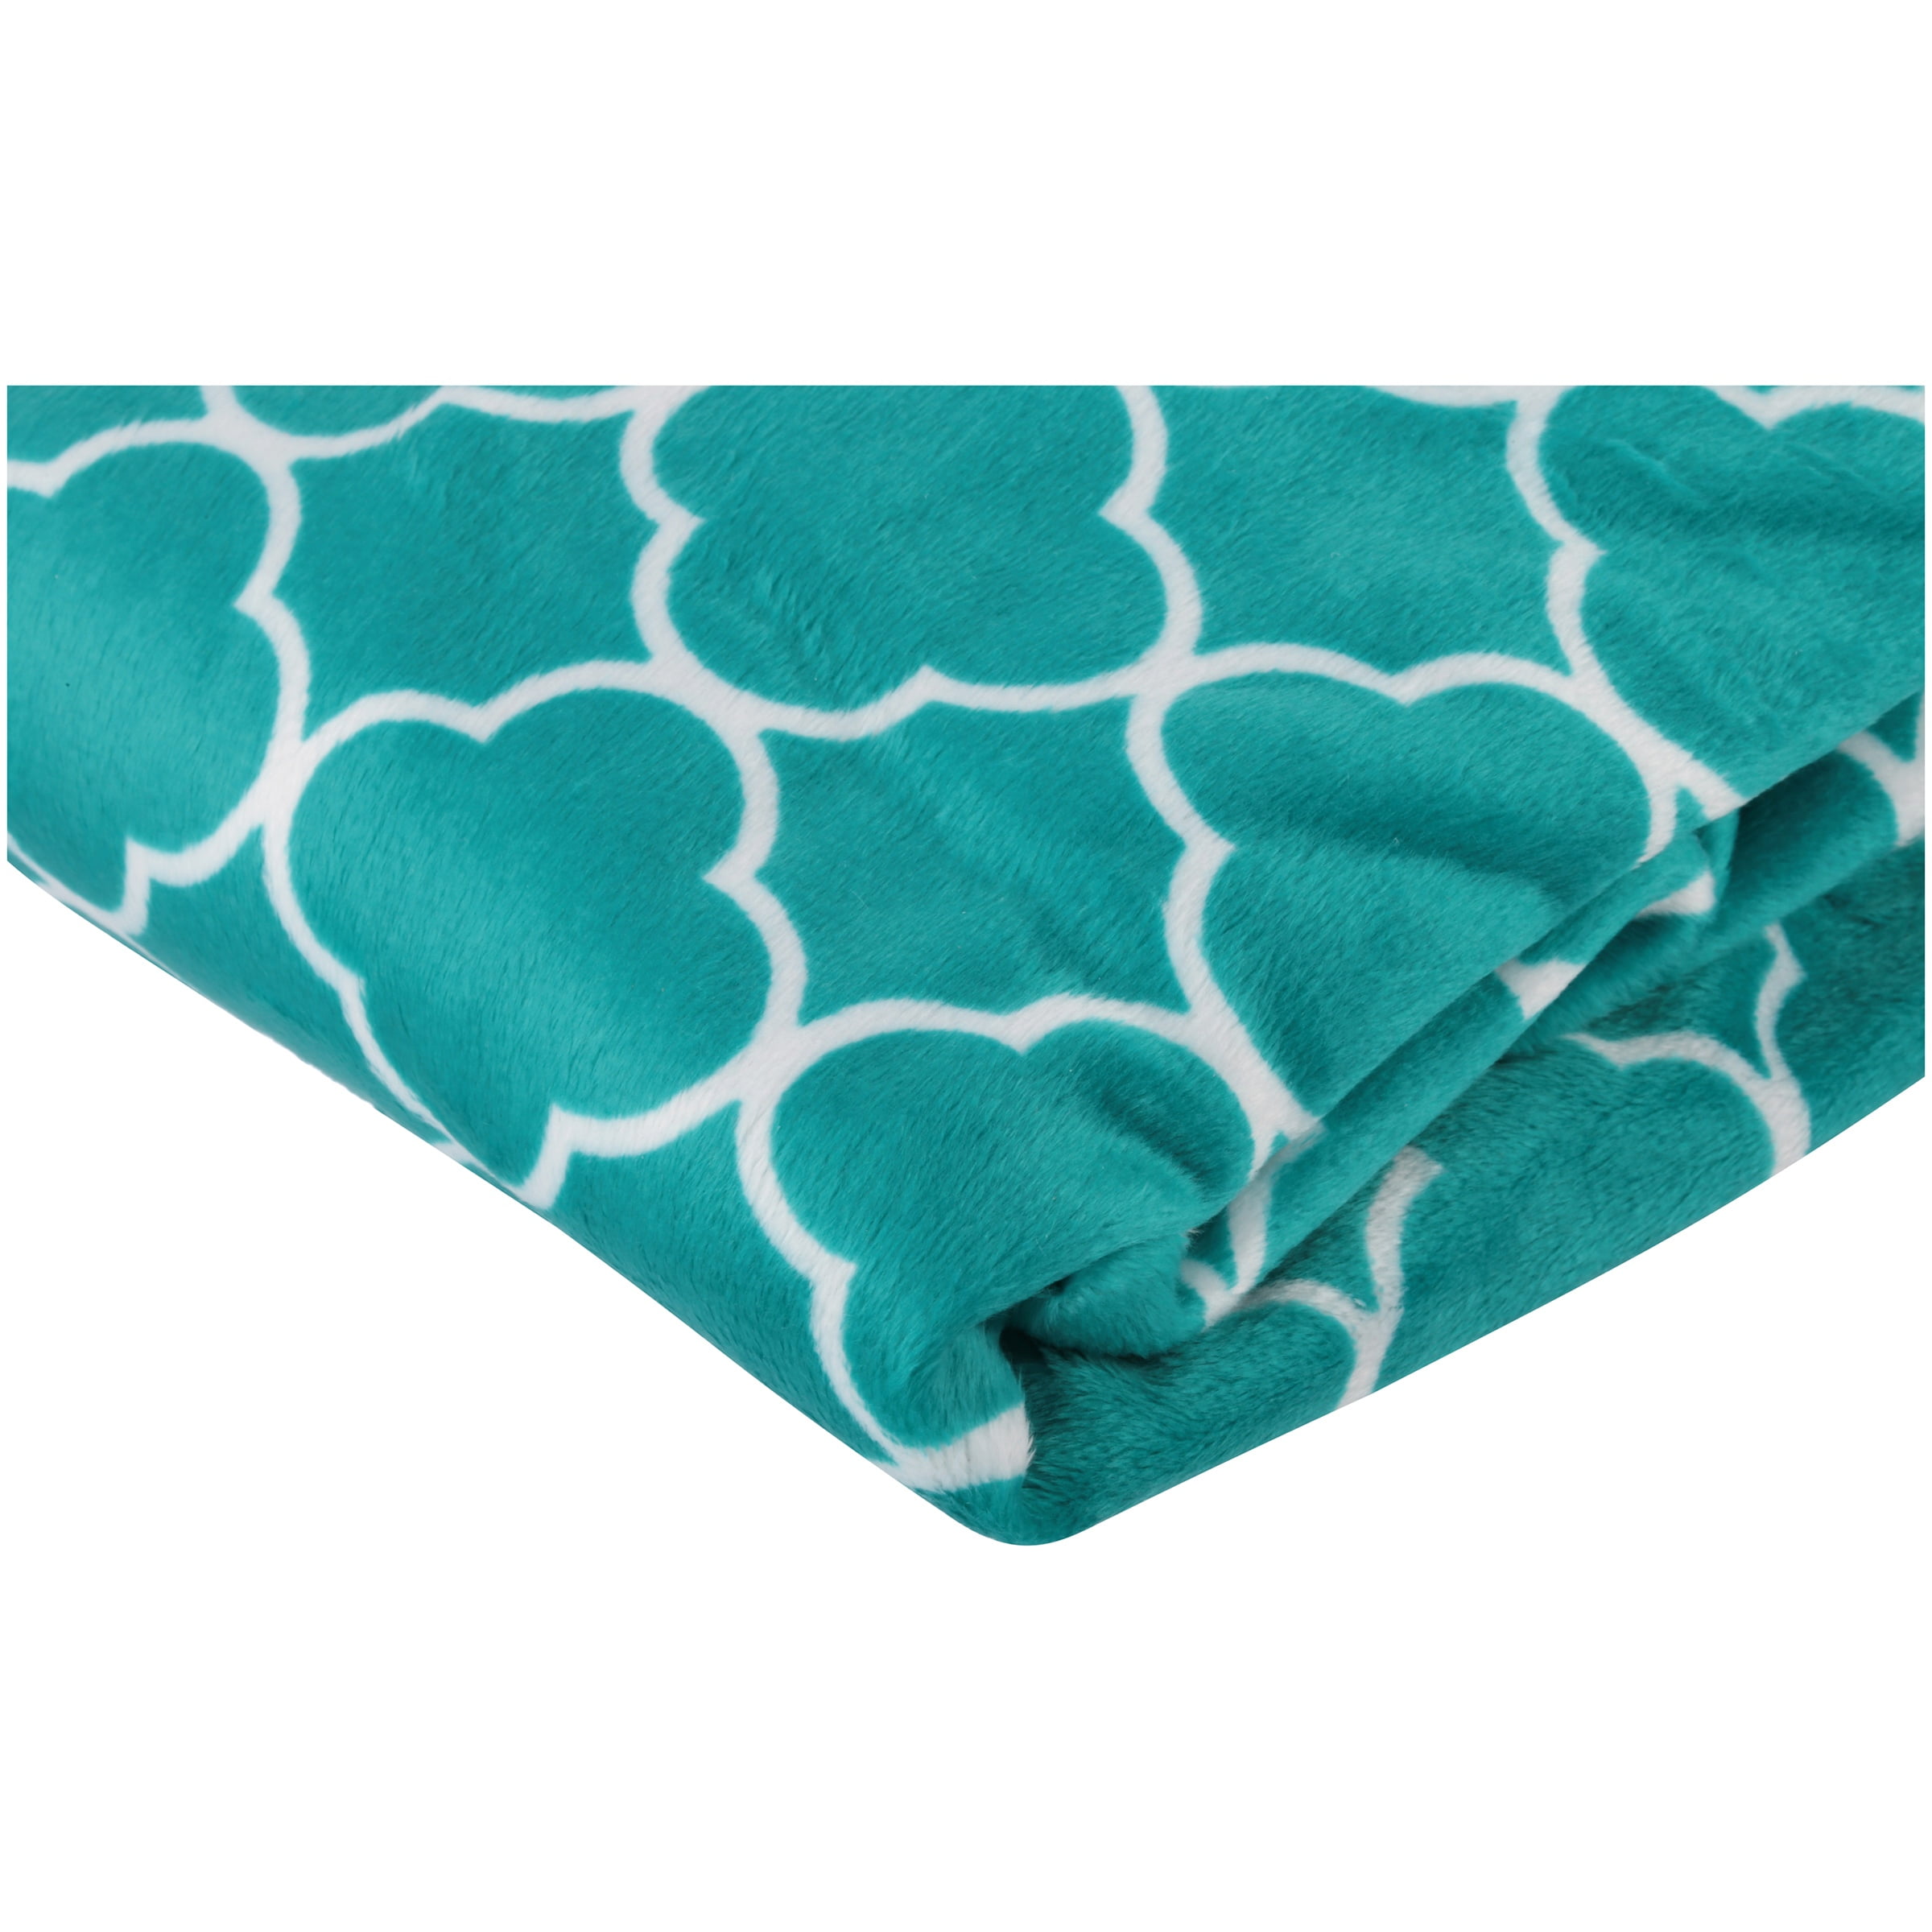 Summer Infant Ultra Plush Changing Pad Cover Teal Medallion